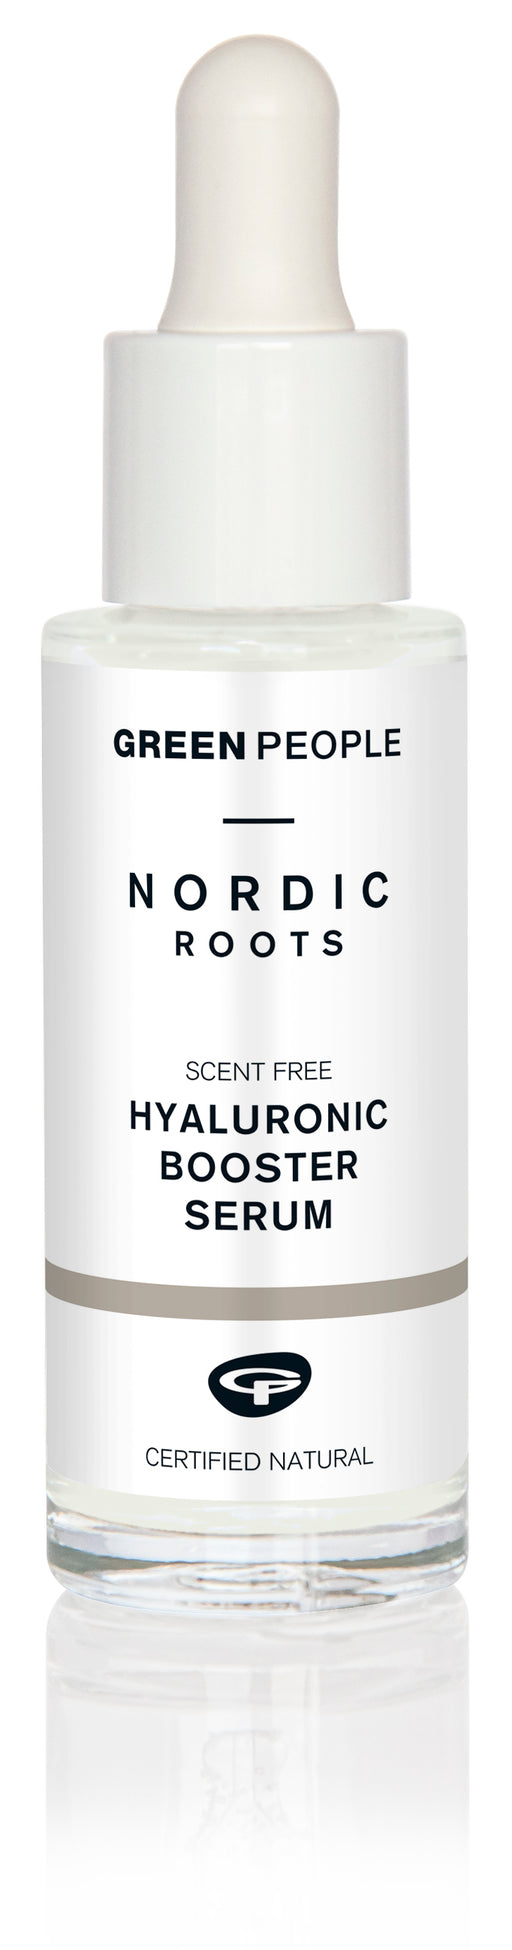 Green People Nordic Roots Hyaluronic Booster Serum 28ml - Dennis the Chemist